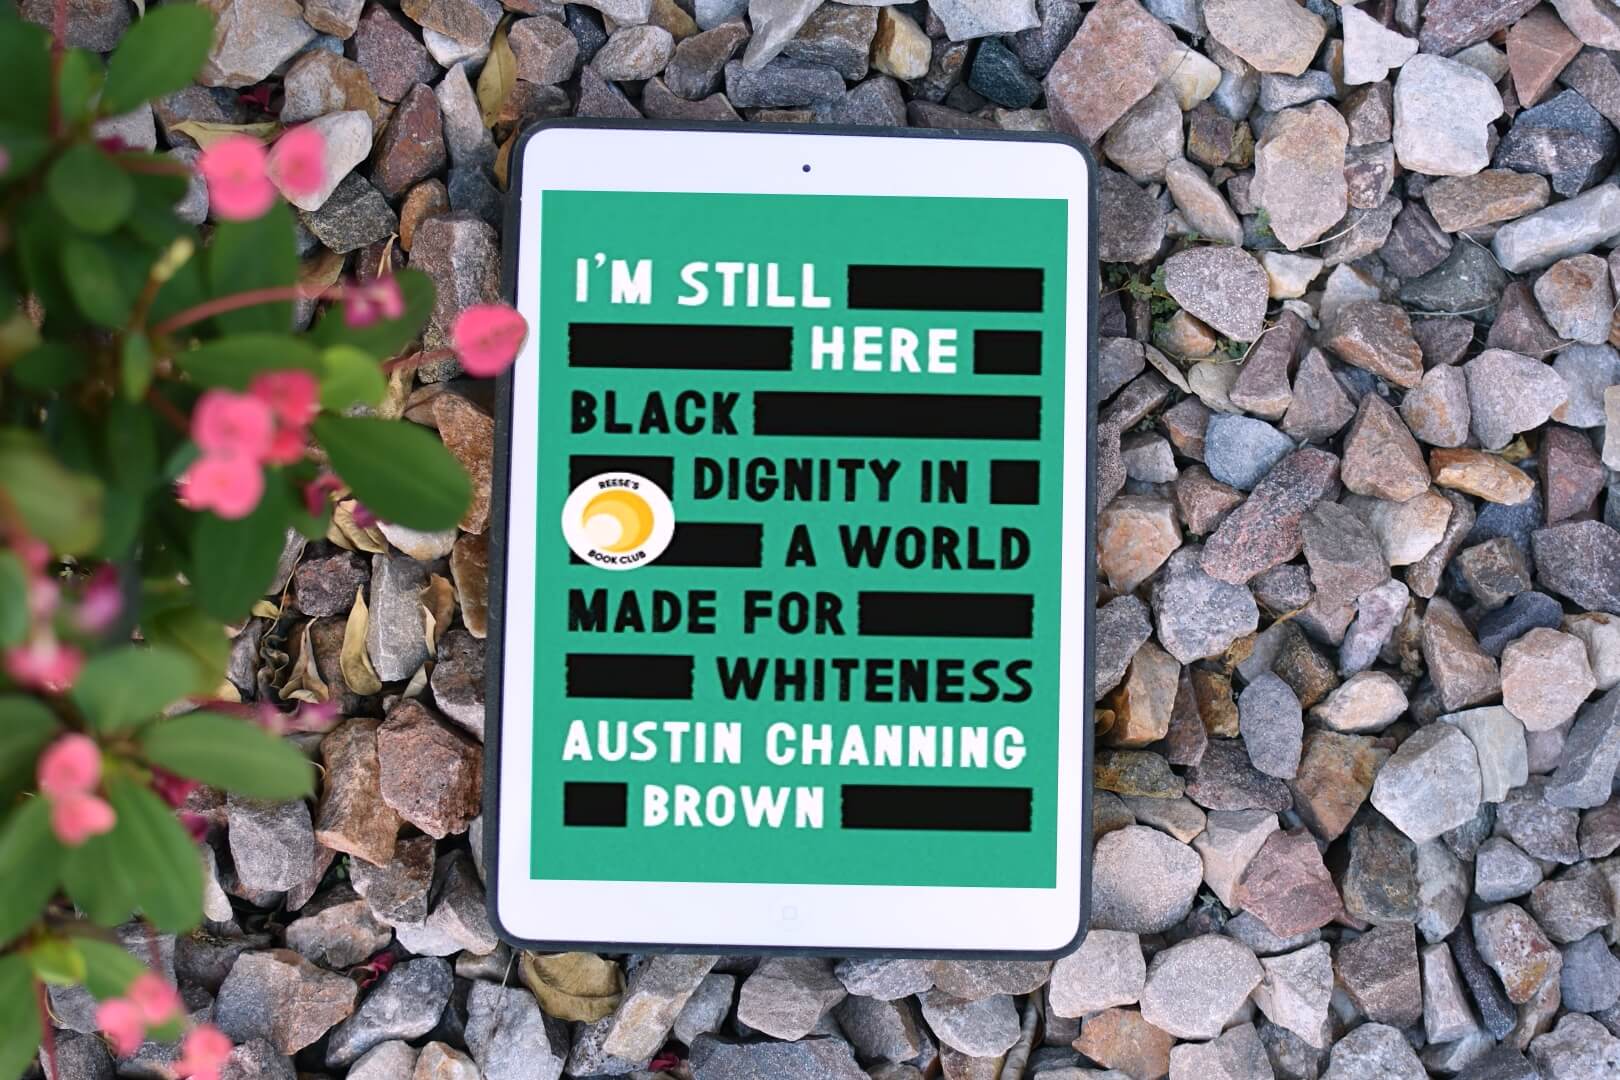 Book Club Questions for I’m Still Here: Black Dignity in a World Made for Whiteness by Austin Channing Brown